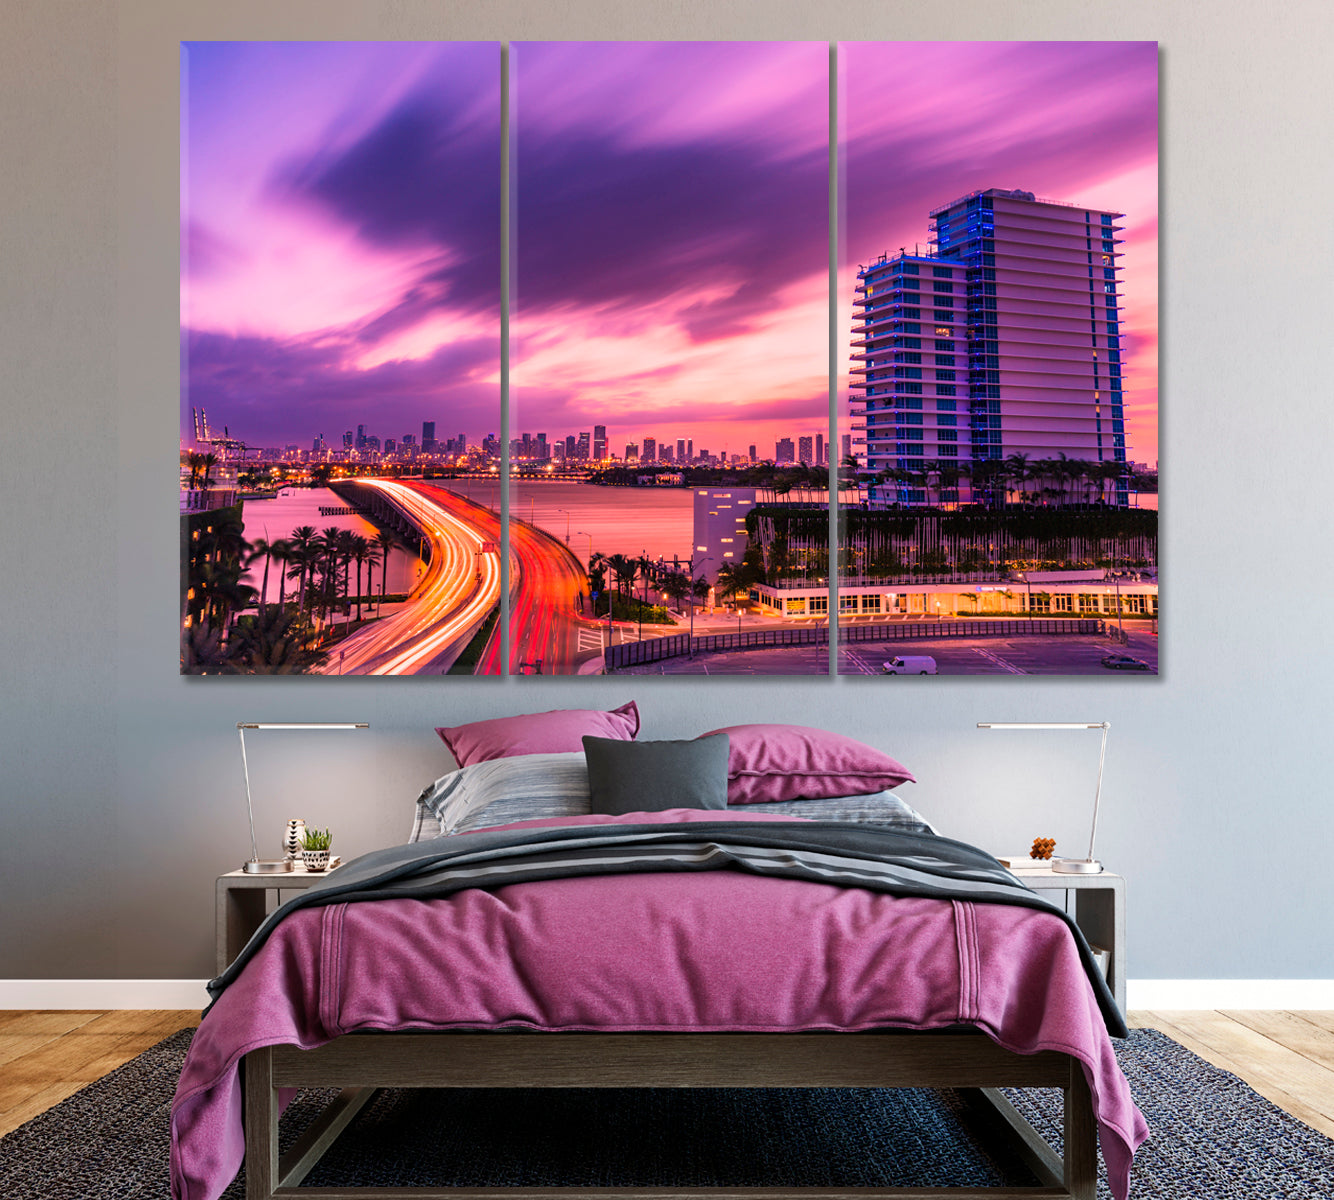 Downtown Miami at Dusk Canvas Print ArtLexy 3 Panels 36"x24" inches 